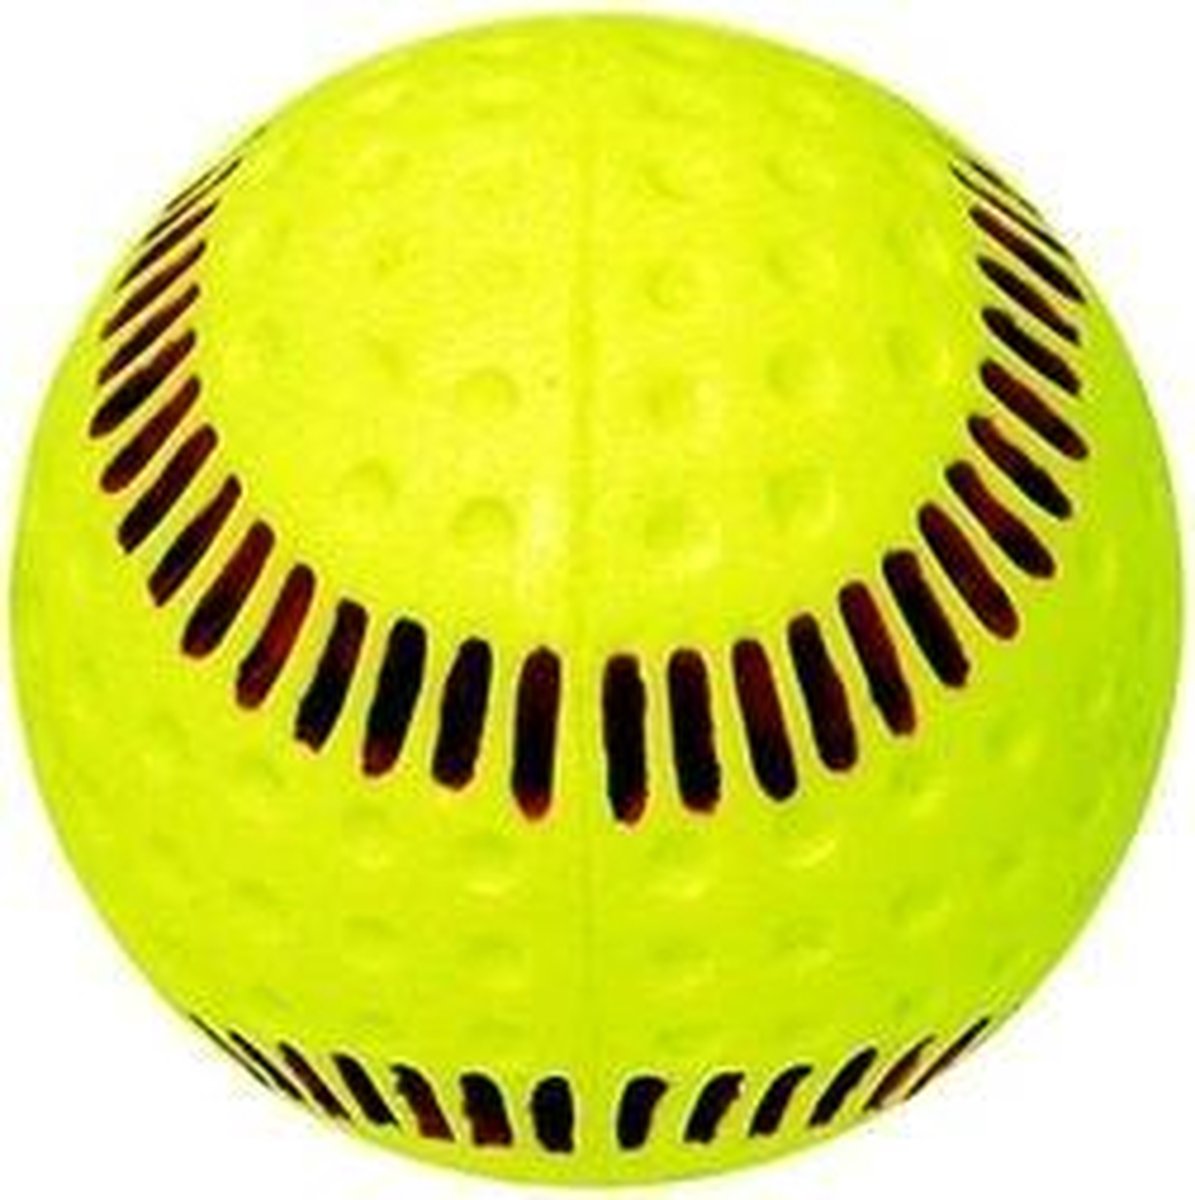 Baden PSBRSY Baden Dimpled Pitching Machine Softballs - Yellow - 12 inch